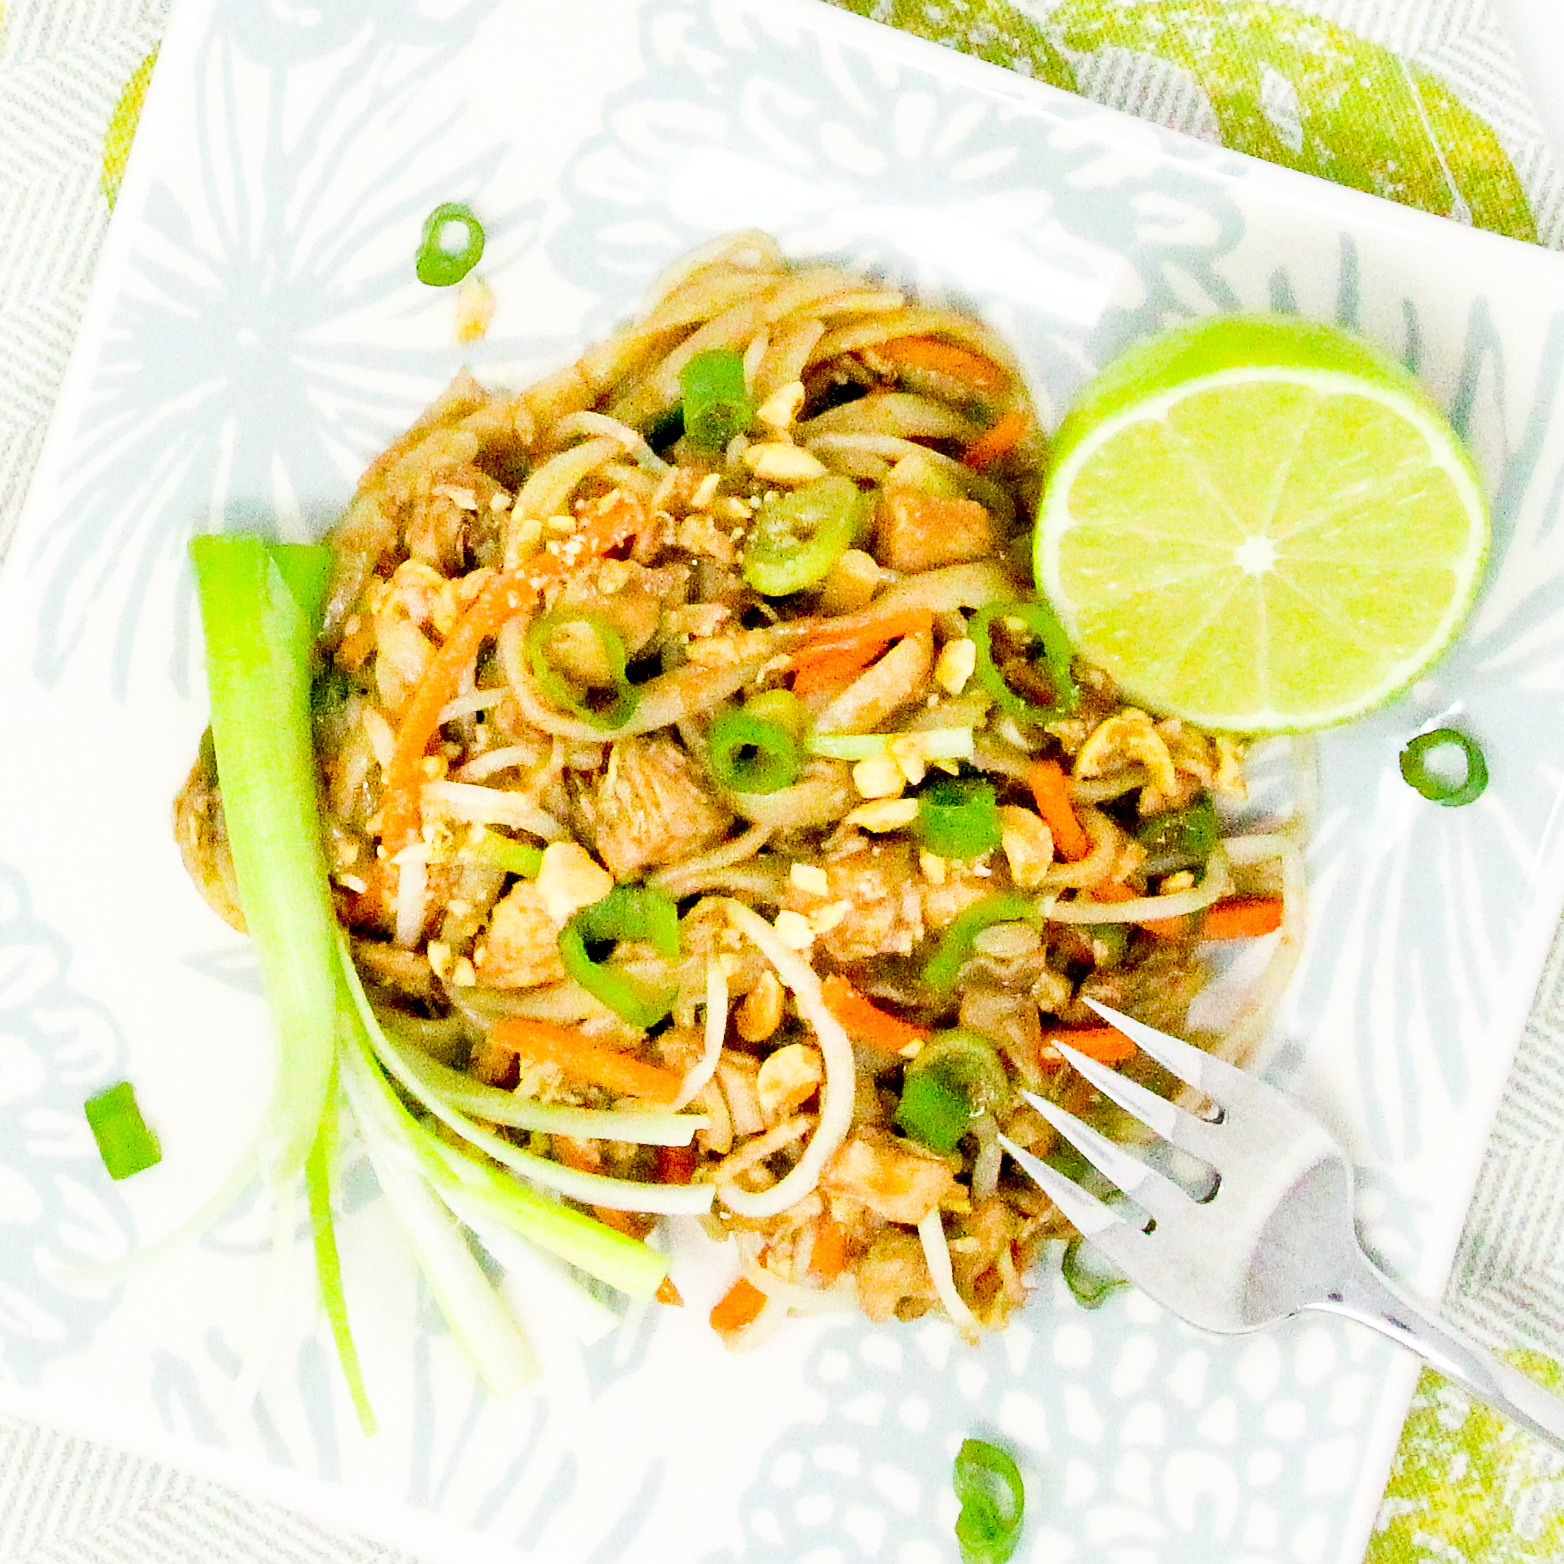 Chicken Pad Thai combines a spicy sweet sauce with rice noodles (making this dish naturally gluten-free), while the crunch of the veggies and roasted peanuts add a pleasing texture. Recipe shared with permission granted by Maddie Day, author of MURDER AT THE RUSTY ANCHOR. 